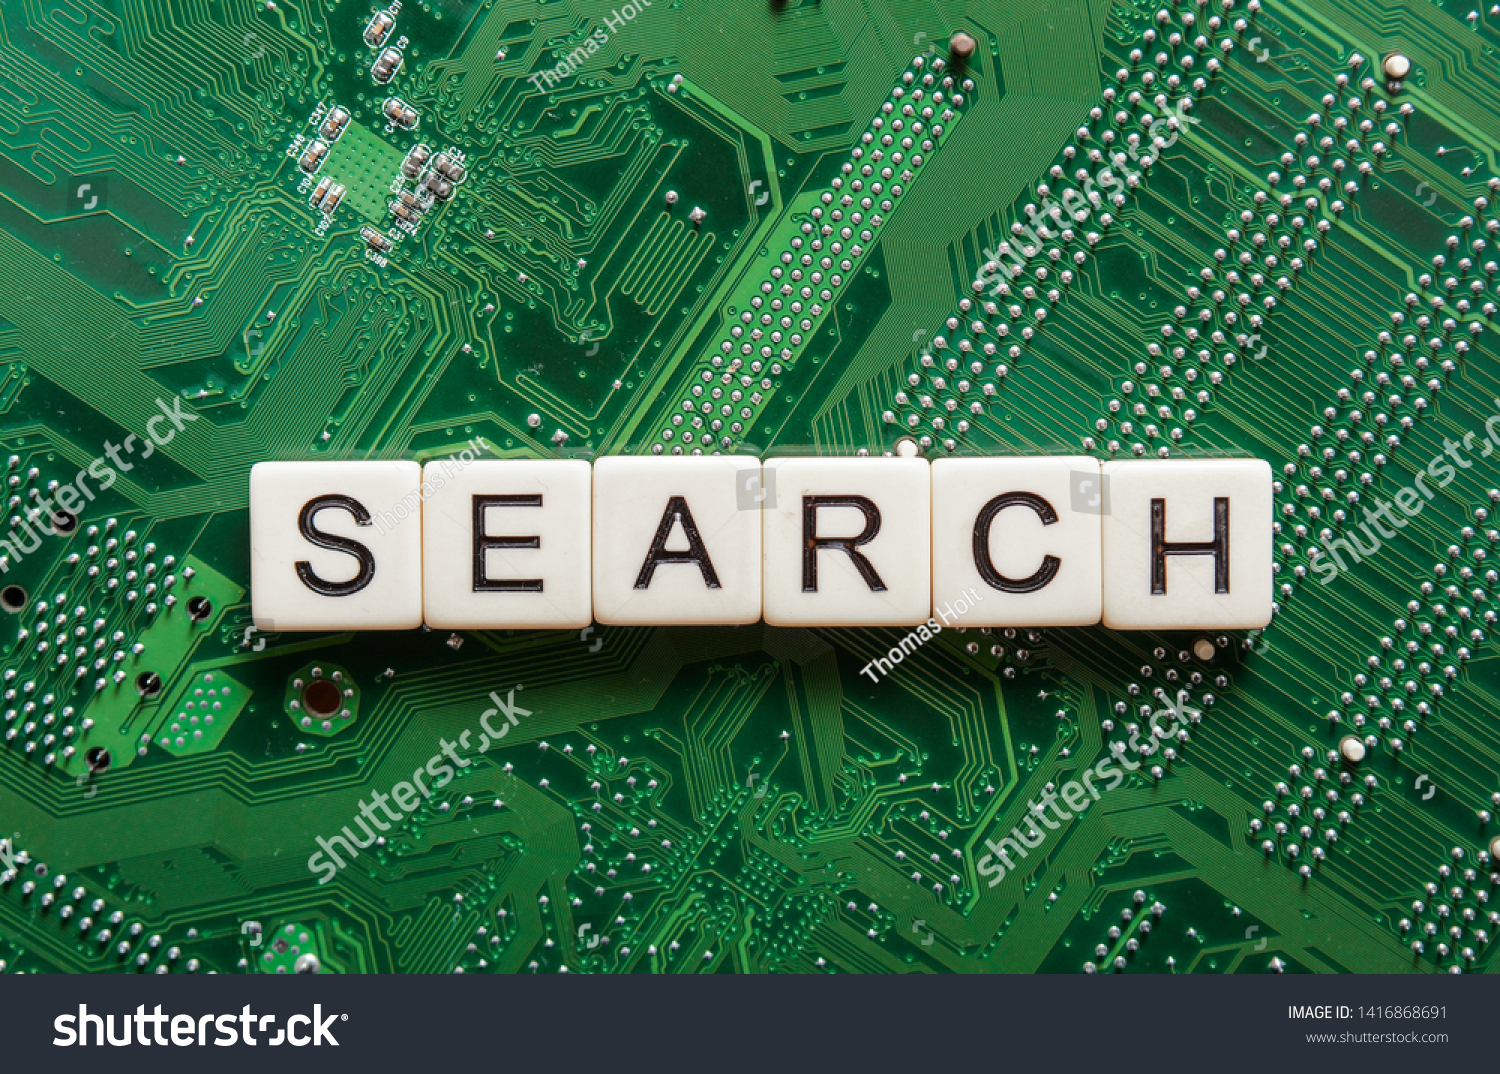 Search results from search engine query, searching the internet #1416868691